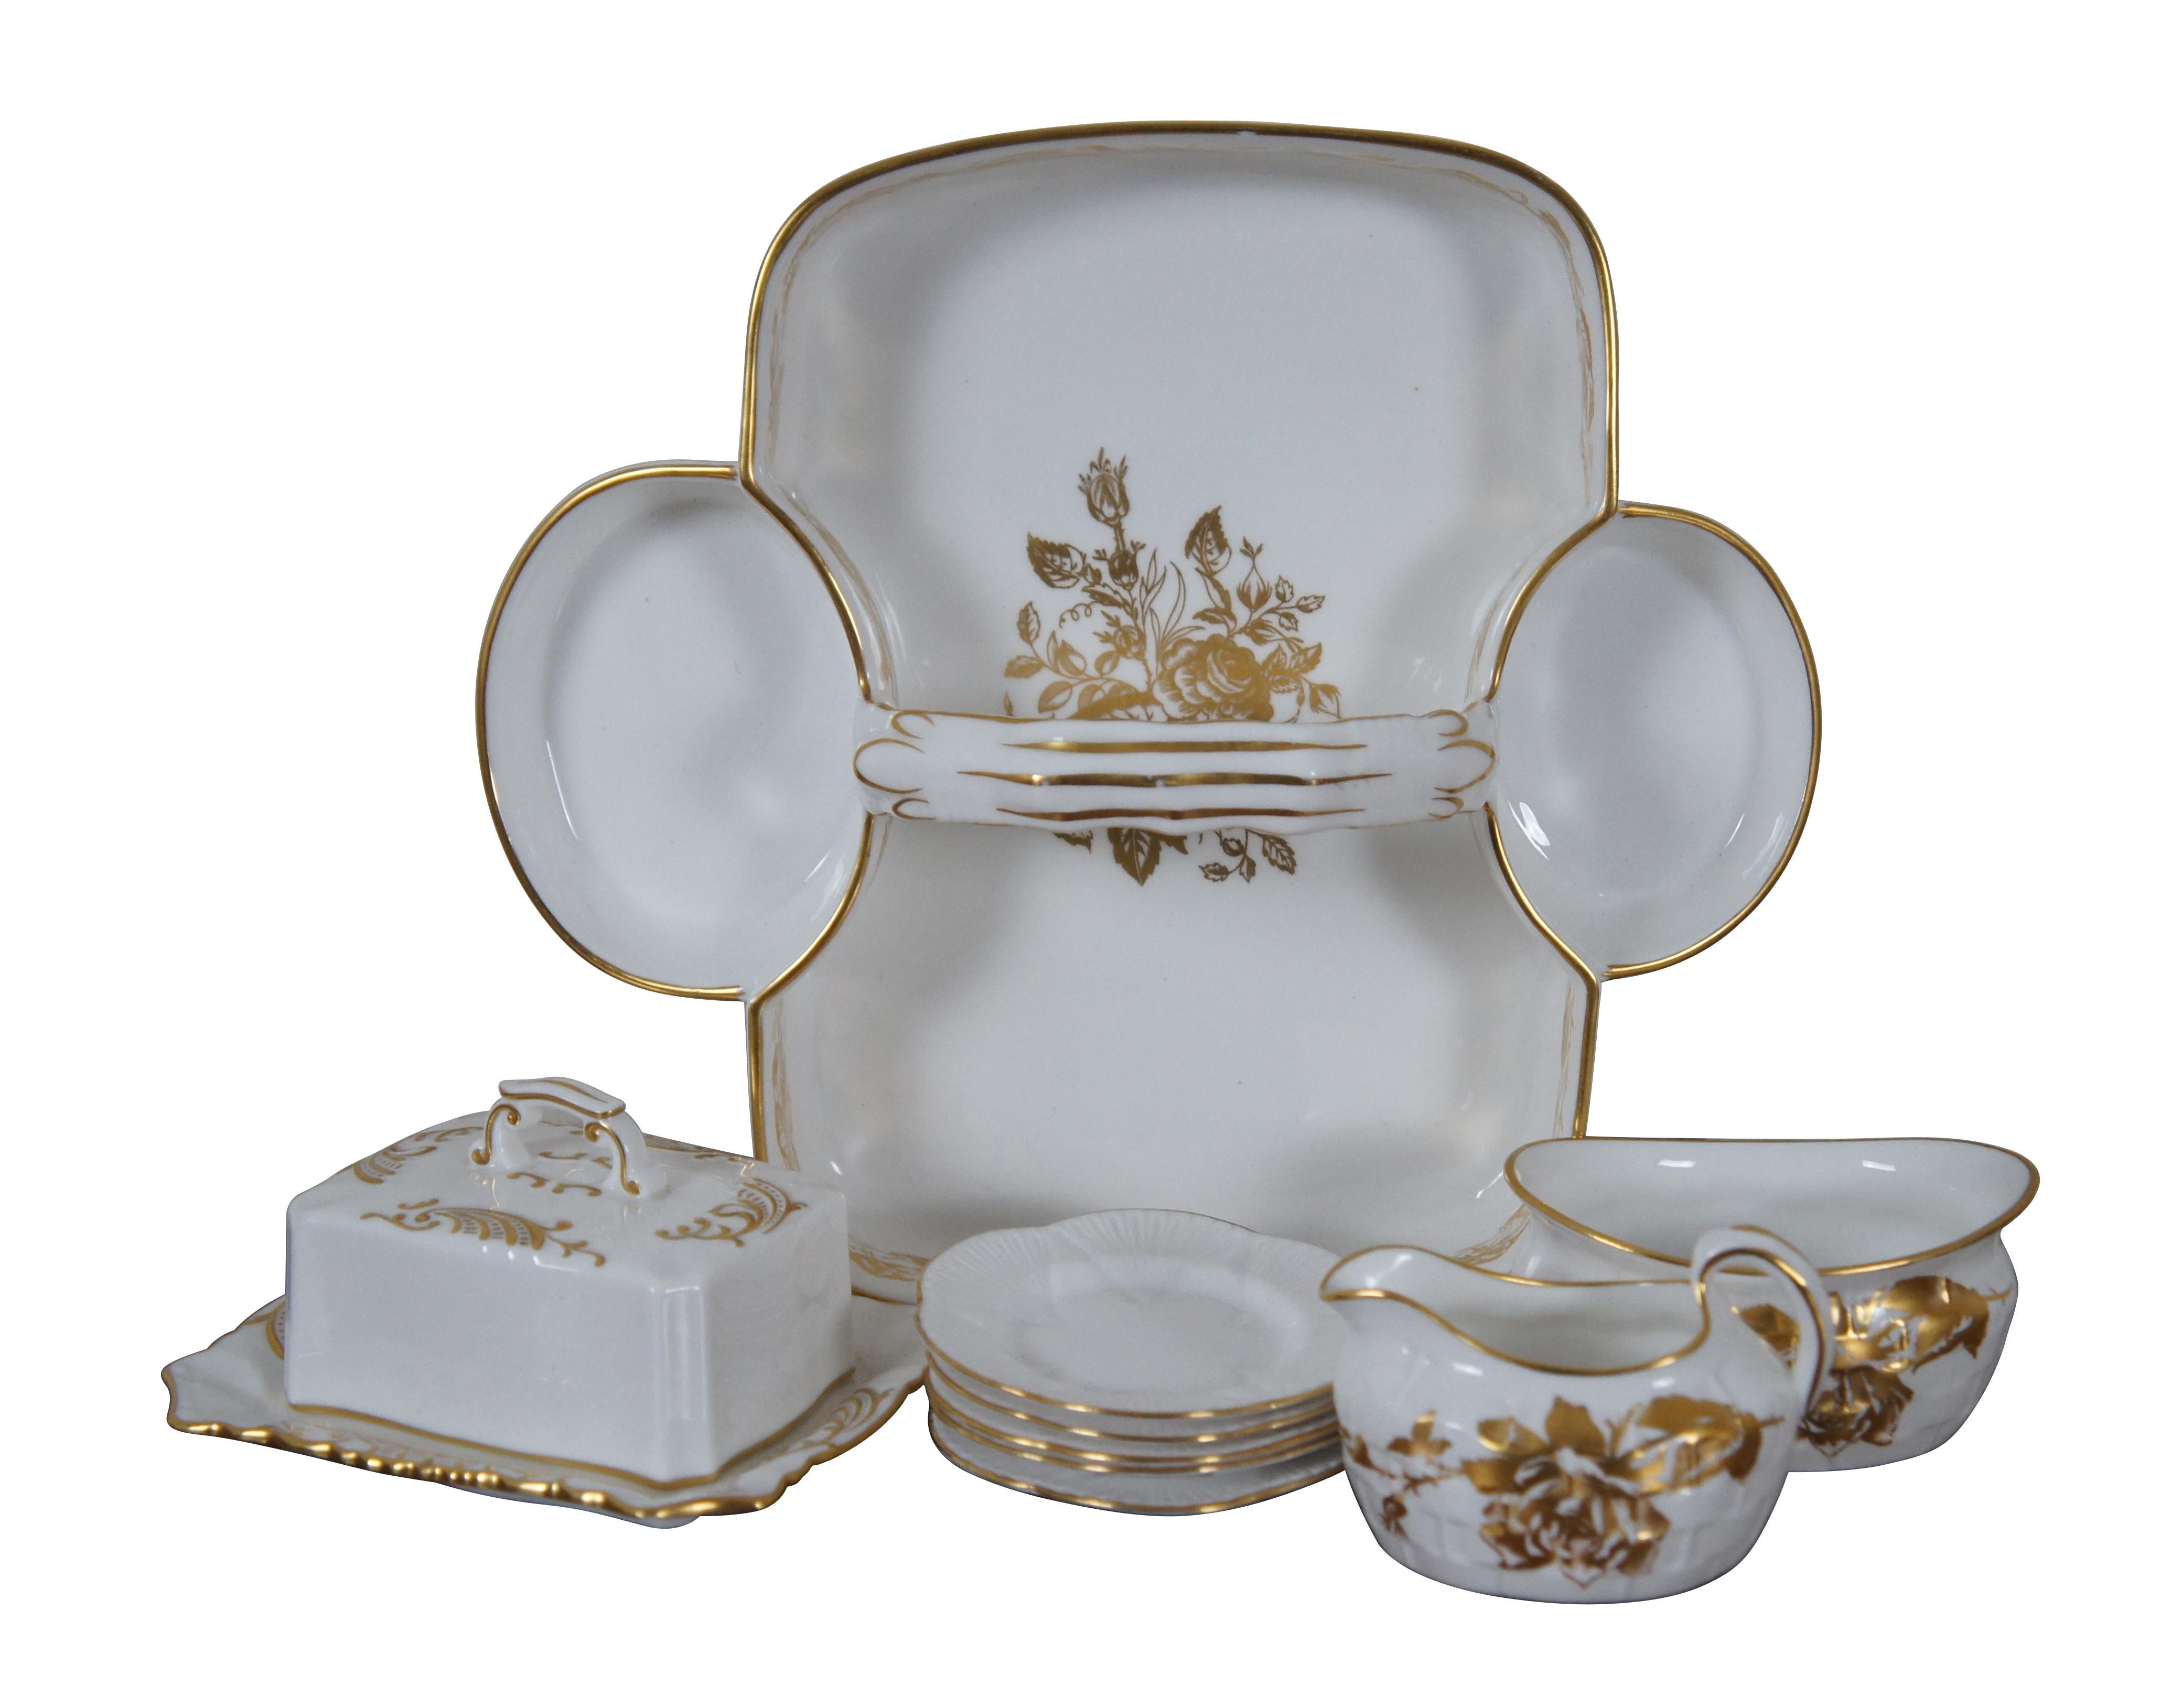 #38183

Vintage 10 piece serving set by Hammersley & Company. White bone china with gilded details. Set includes handled serving tray with creamer and sugar bowl in the Rose Point pattern, butter dish and lid, and five flower shaped nut dishes /